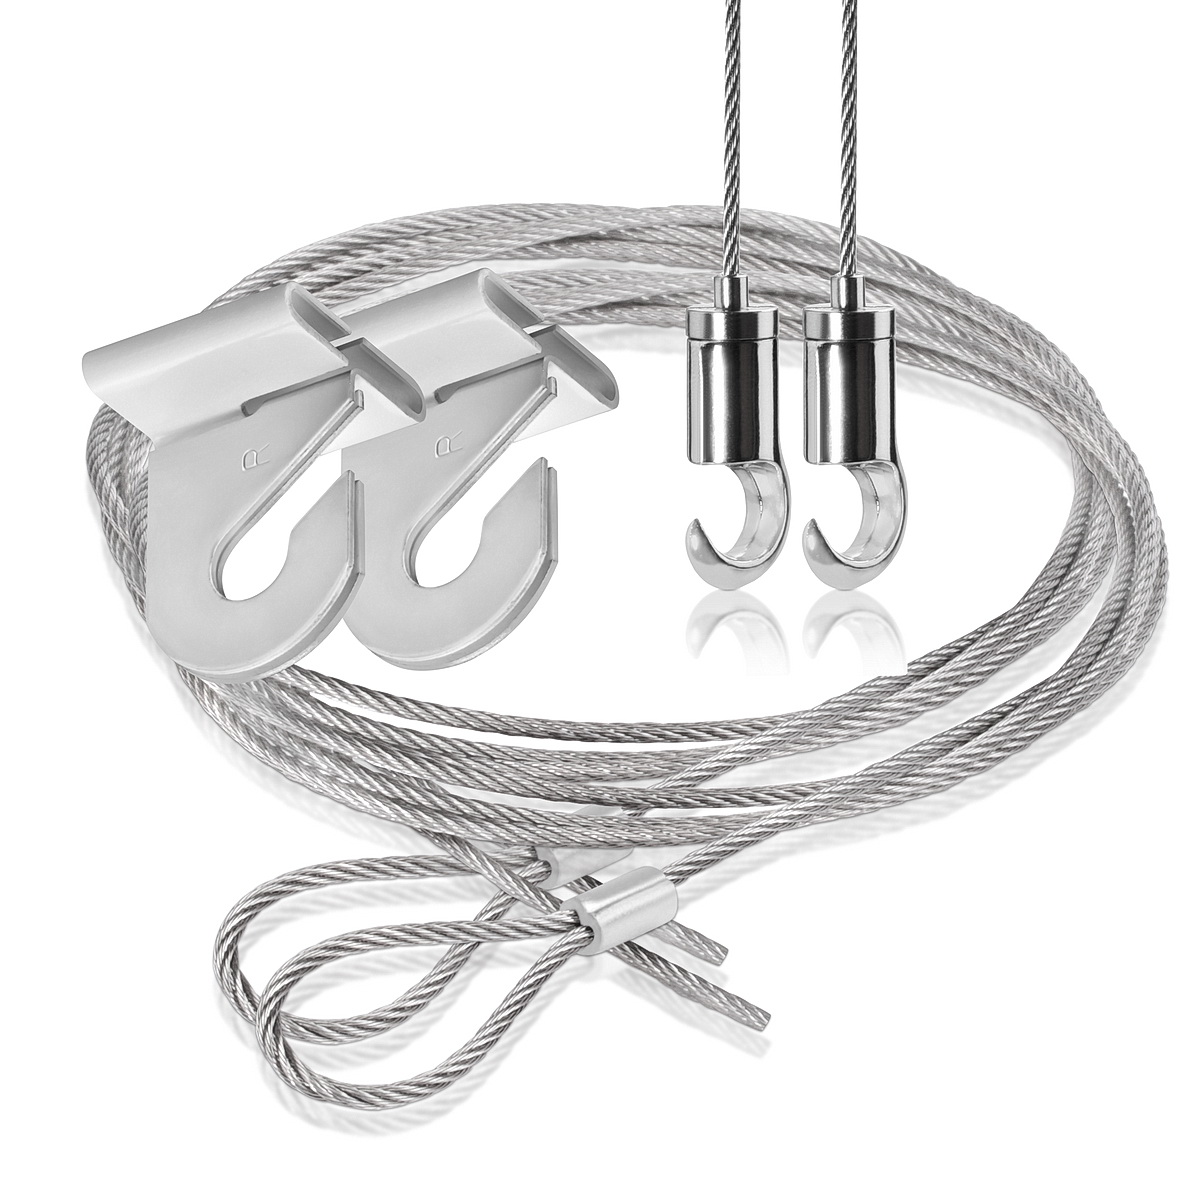 Suspended Kit, T Clamp, Looped Stainless Steel Cable - 48'', Hook